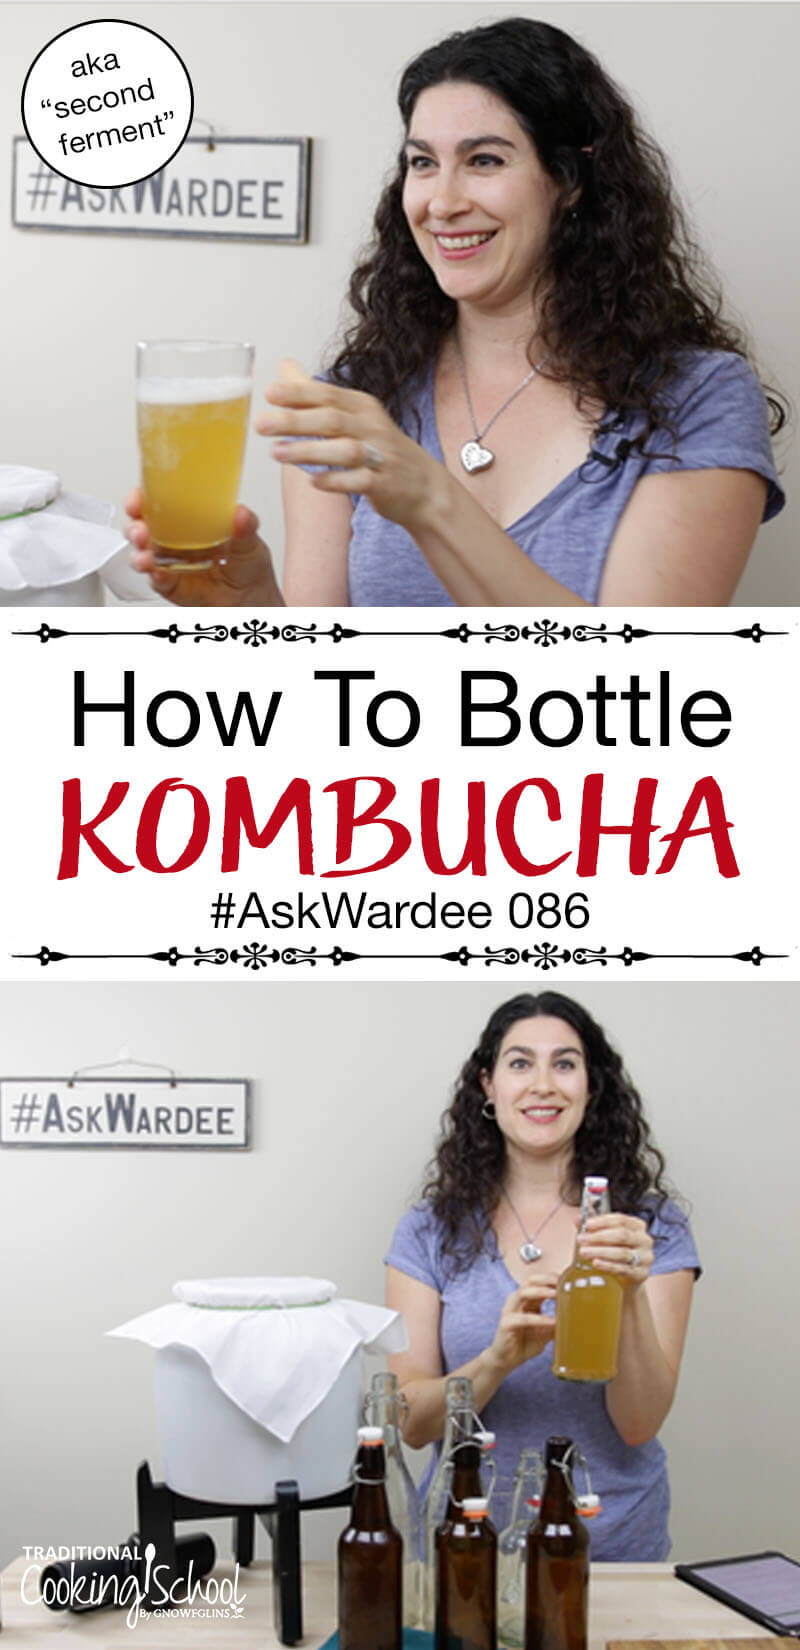 Want to save money, flavor your Kombucha, and build up carbonation? Bottle it! Watch, listen, or read to learn how to second ferment Kombucha, how to choose the right bottles, and what to do if it's too sour! | AskWardee.tv